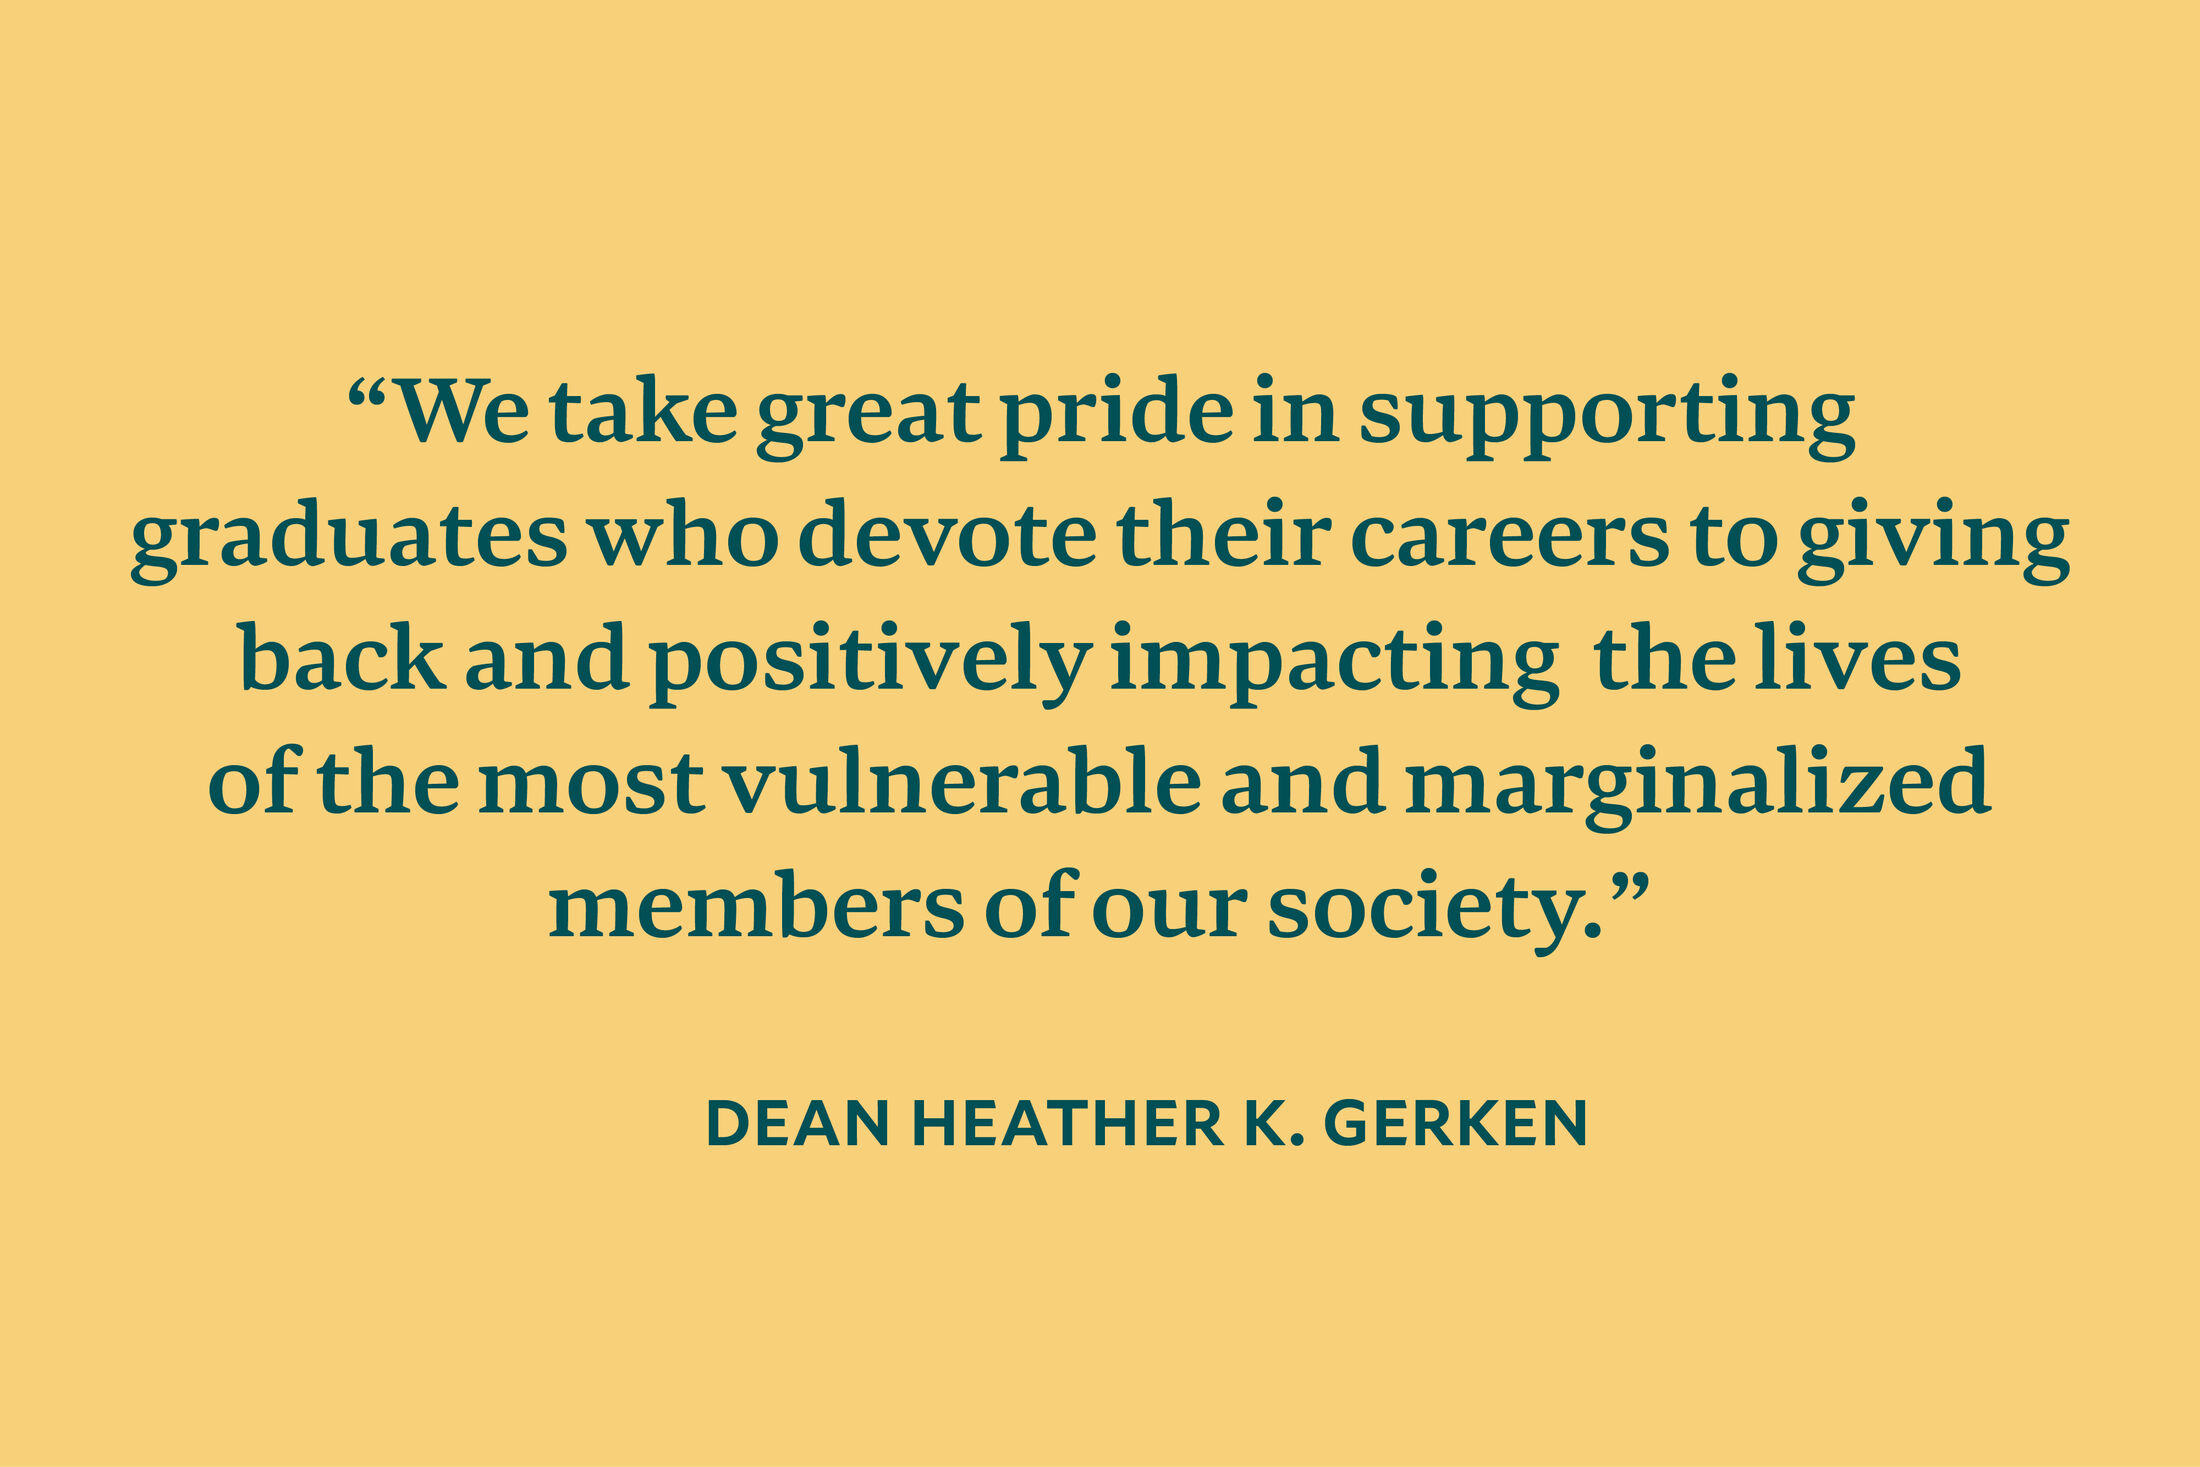 Text: “We take great pride in supporting graduates who devote their careers to giving back and positively impacting the lives of the most vulnerable and marginalized members of our society." — Dean Heather K. Gerken